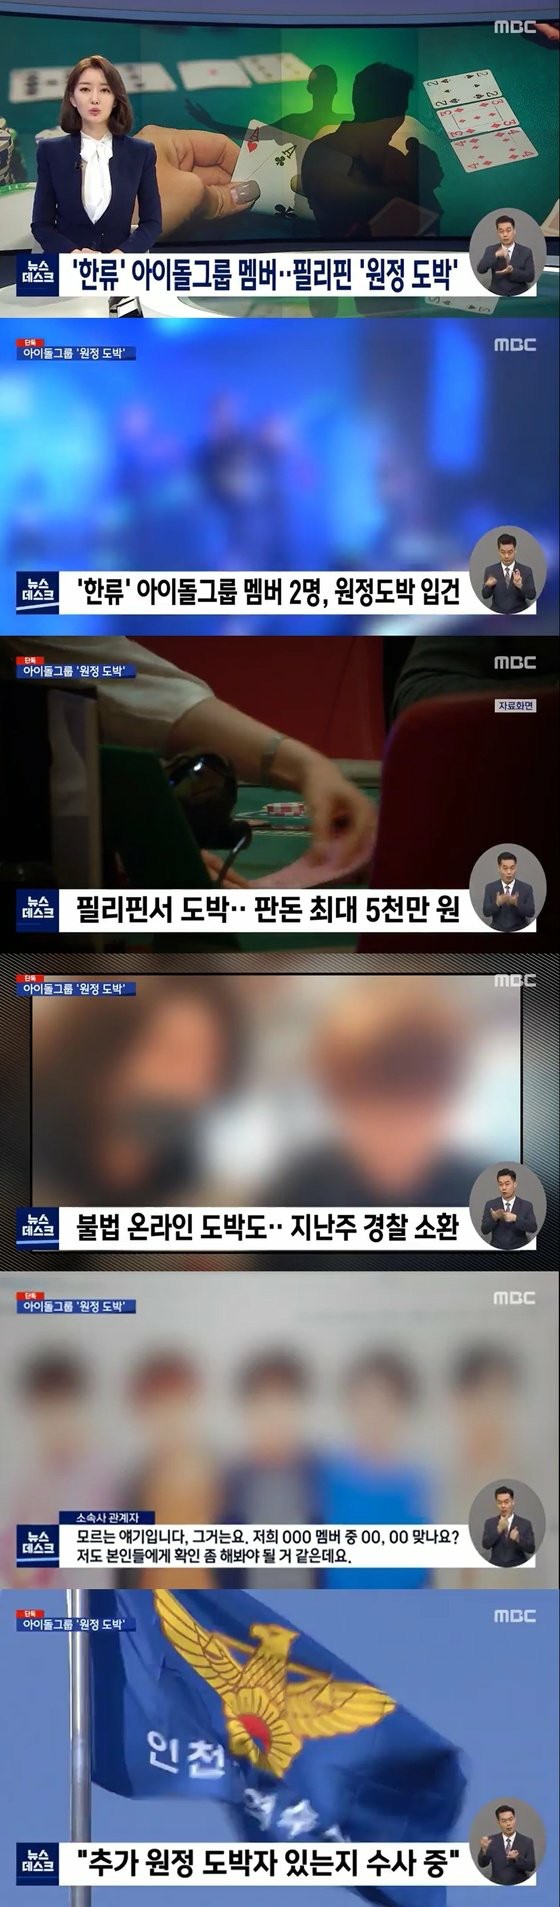 Two famous idol members in their thirties reported on suspicion of gambling during an overseas expedition and MBC reported ... A stake of 50 million won.